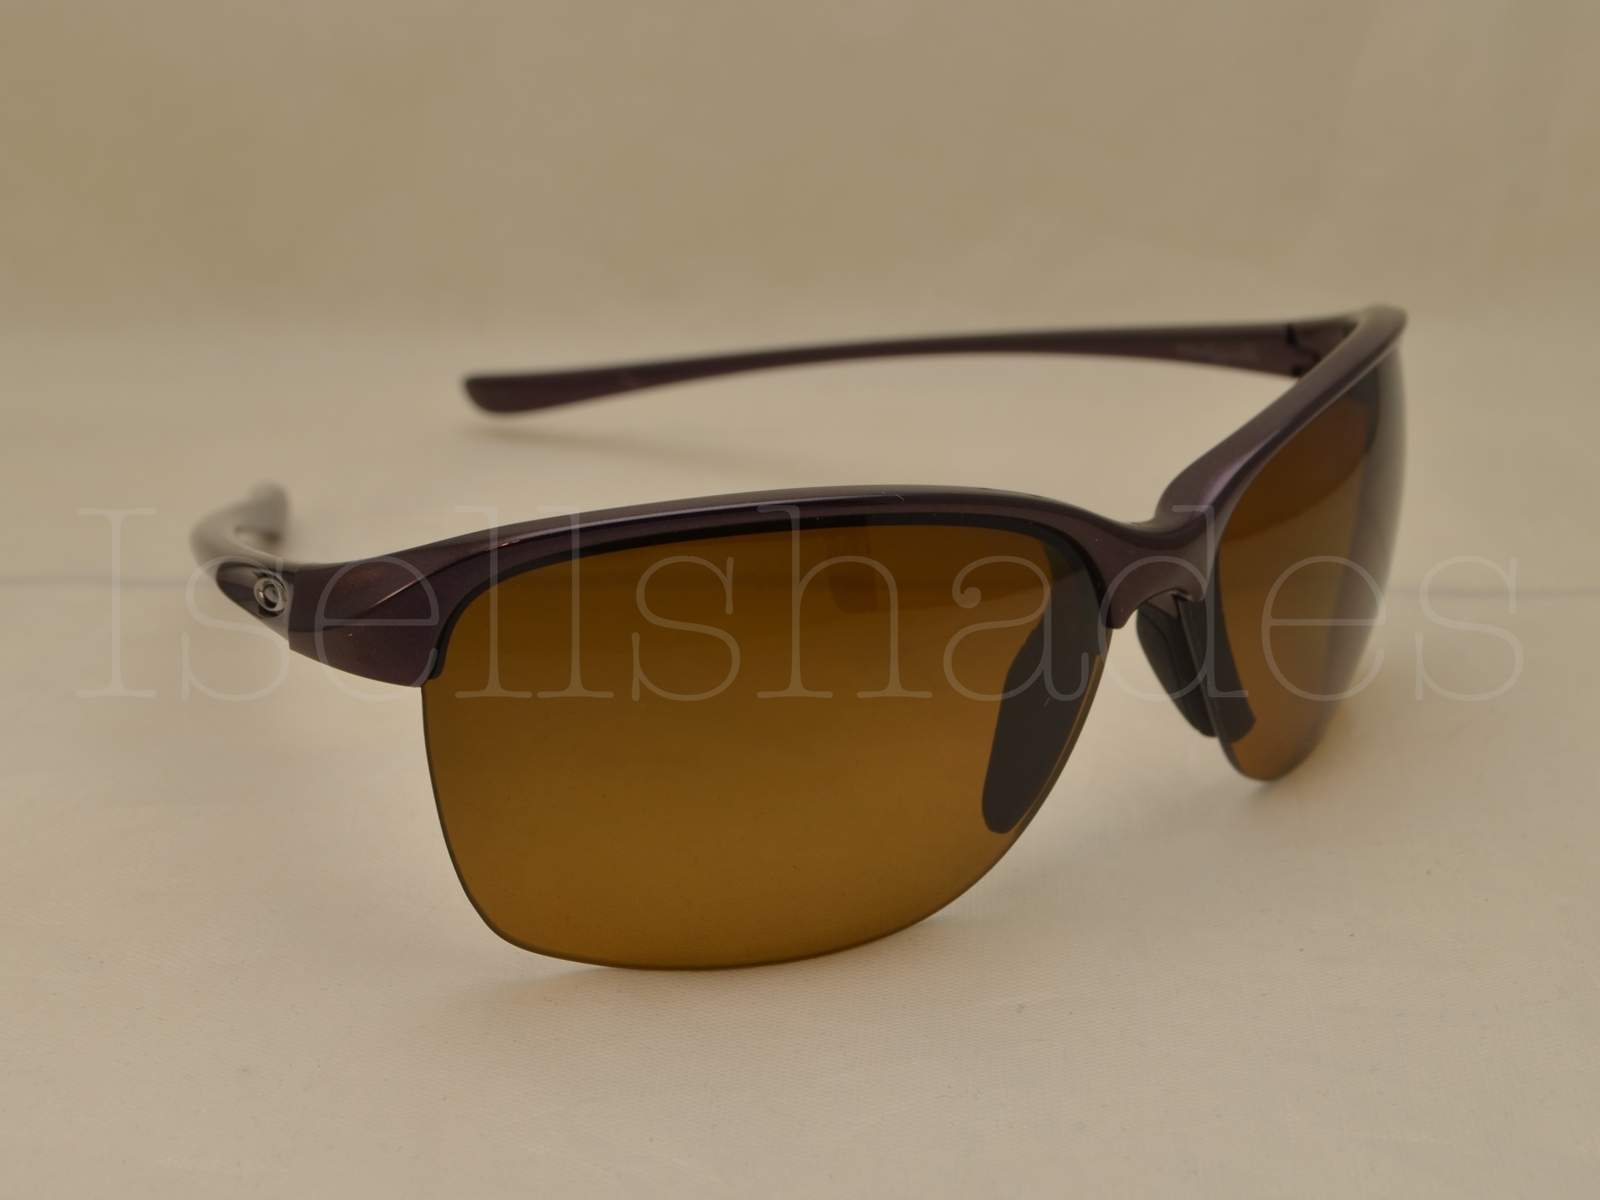 OAKLEY OO9191 Unstoppable Raspberry Spritzer - Woman Sunglasses, Brown  Gradient Polarized Lens